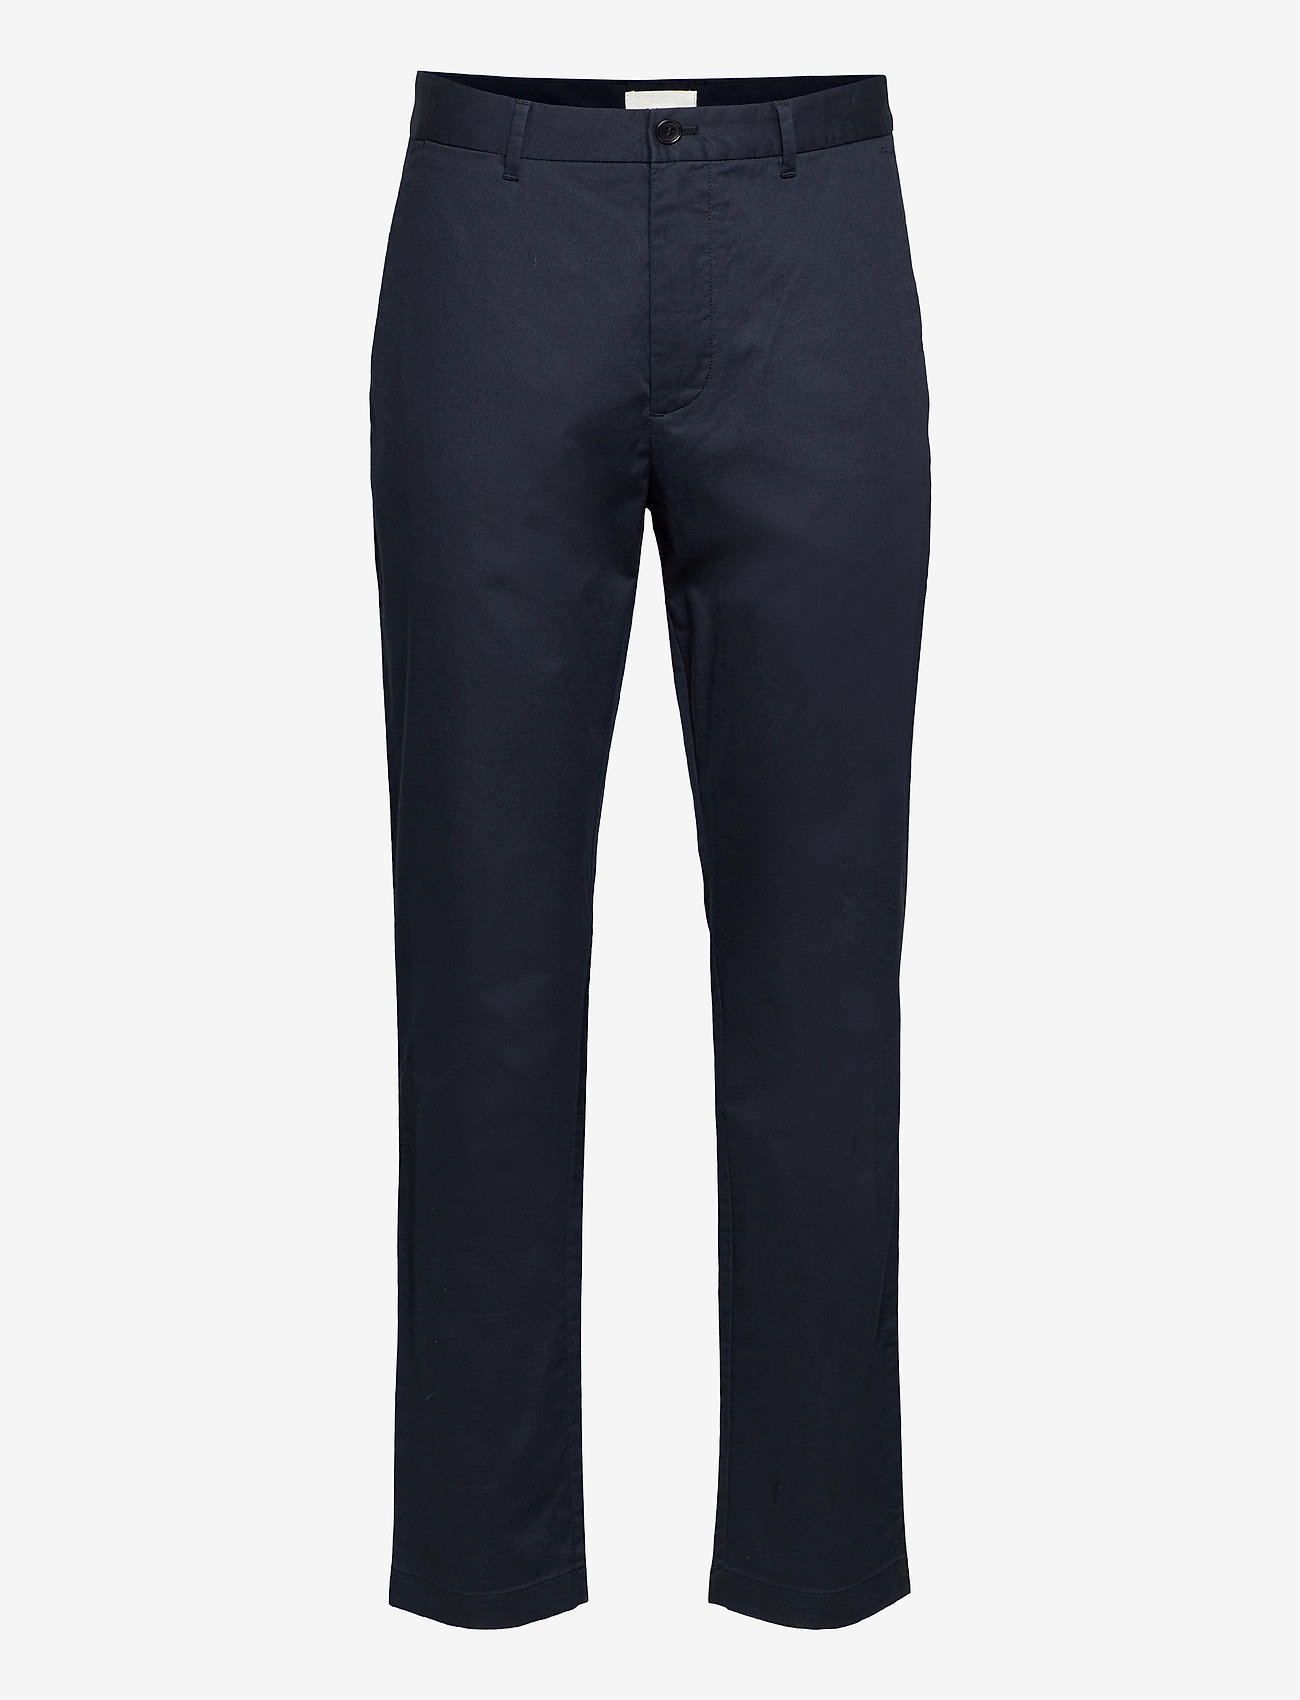 Wood Wood - Marcus light twill trousers - chinot - navy - 0